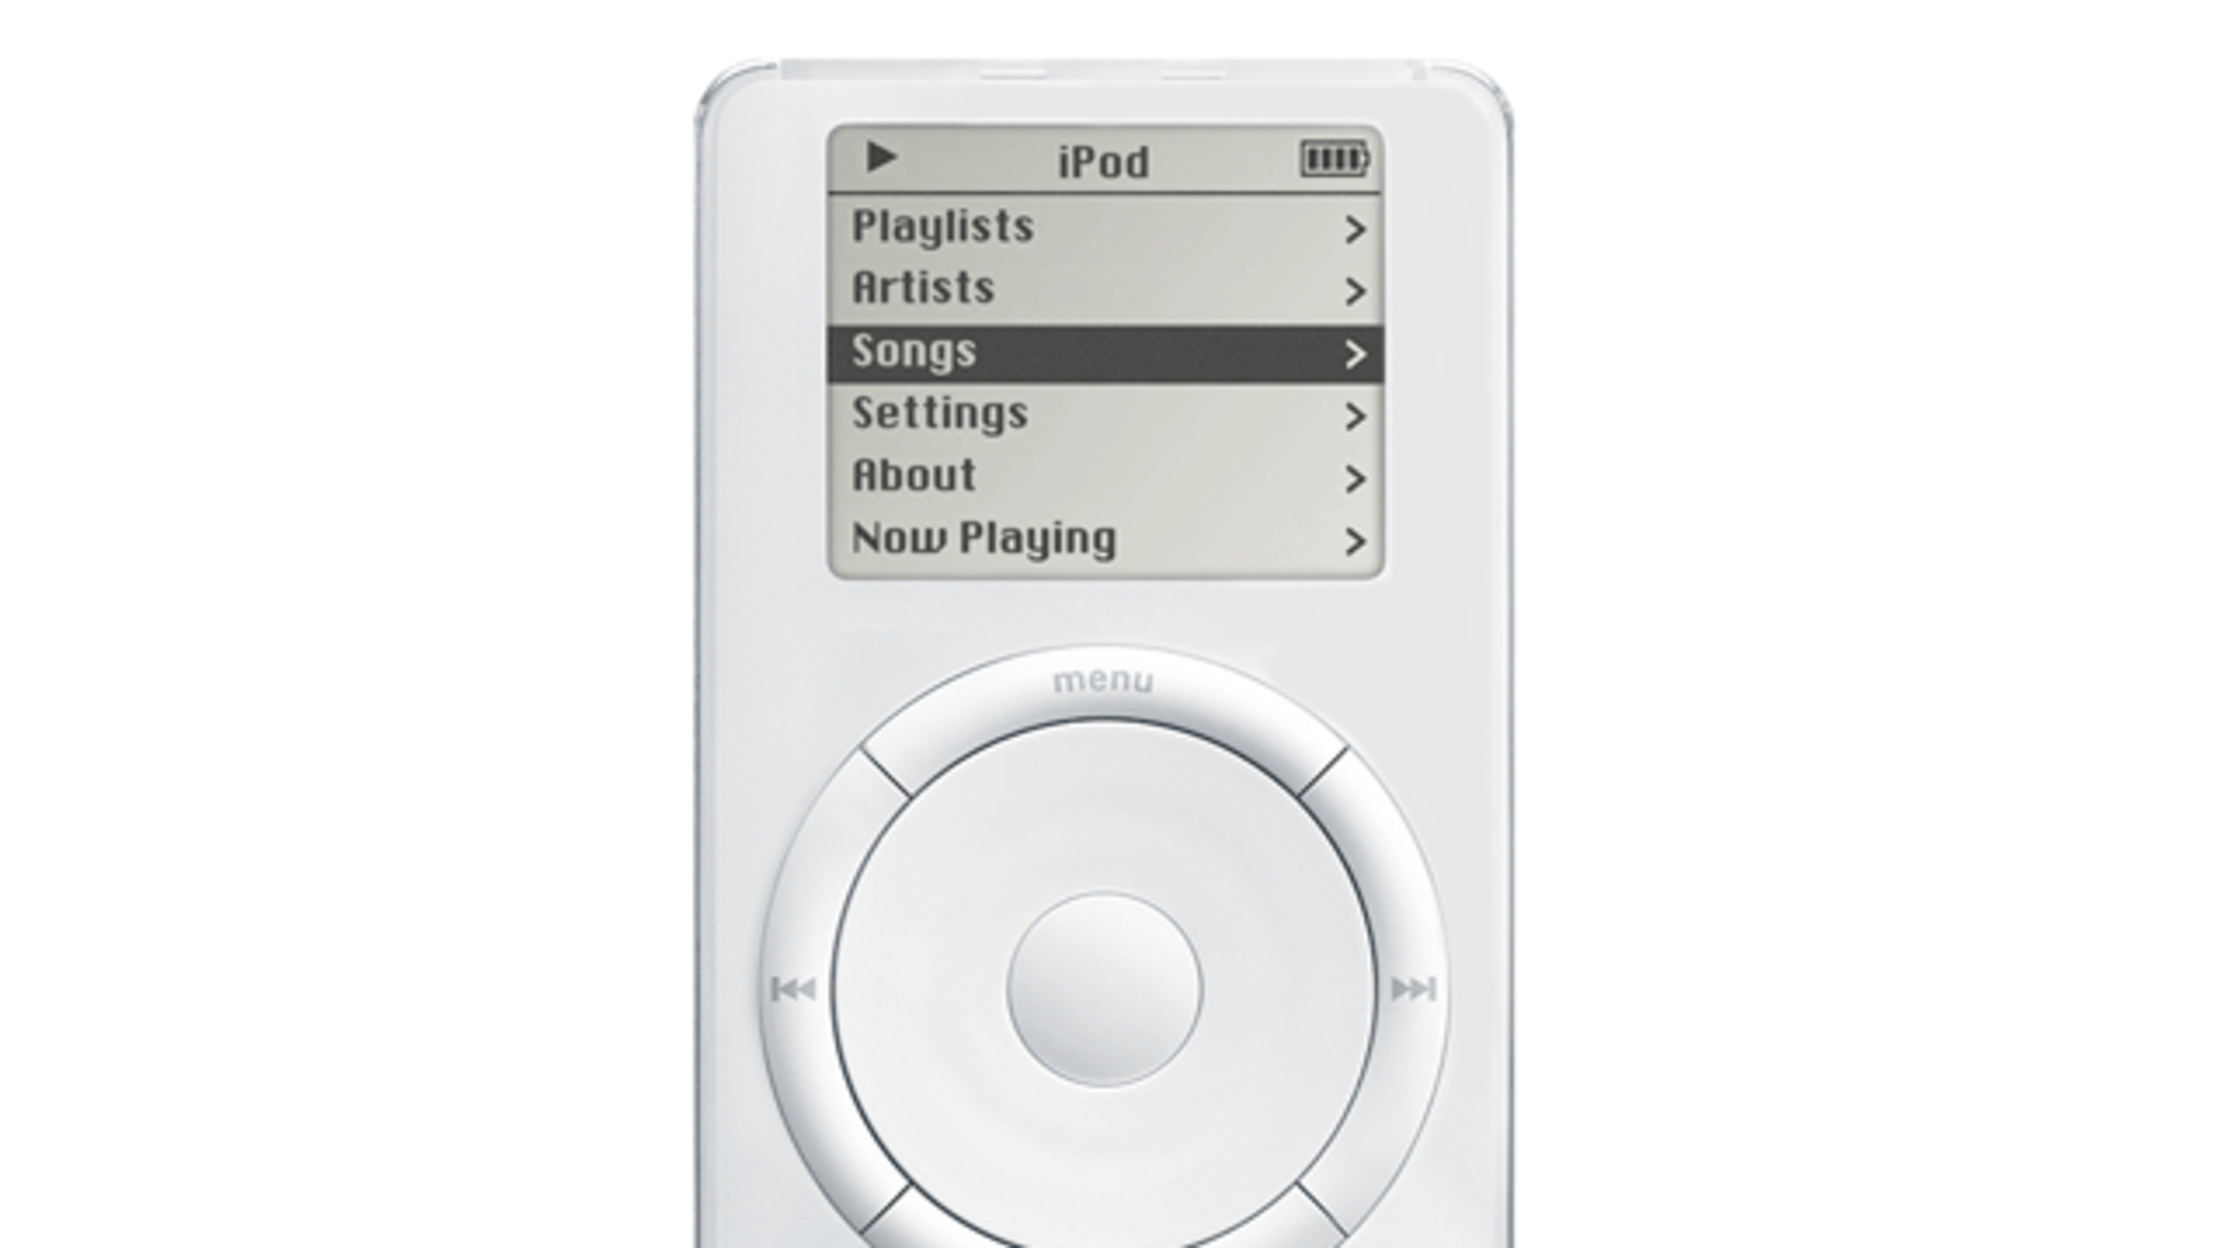 download the last version for ipod Image Tuner Pro 9.8